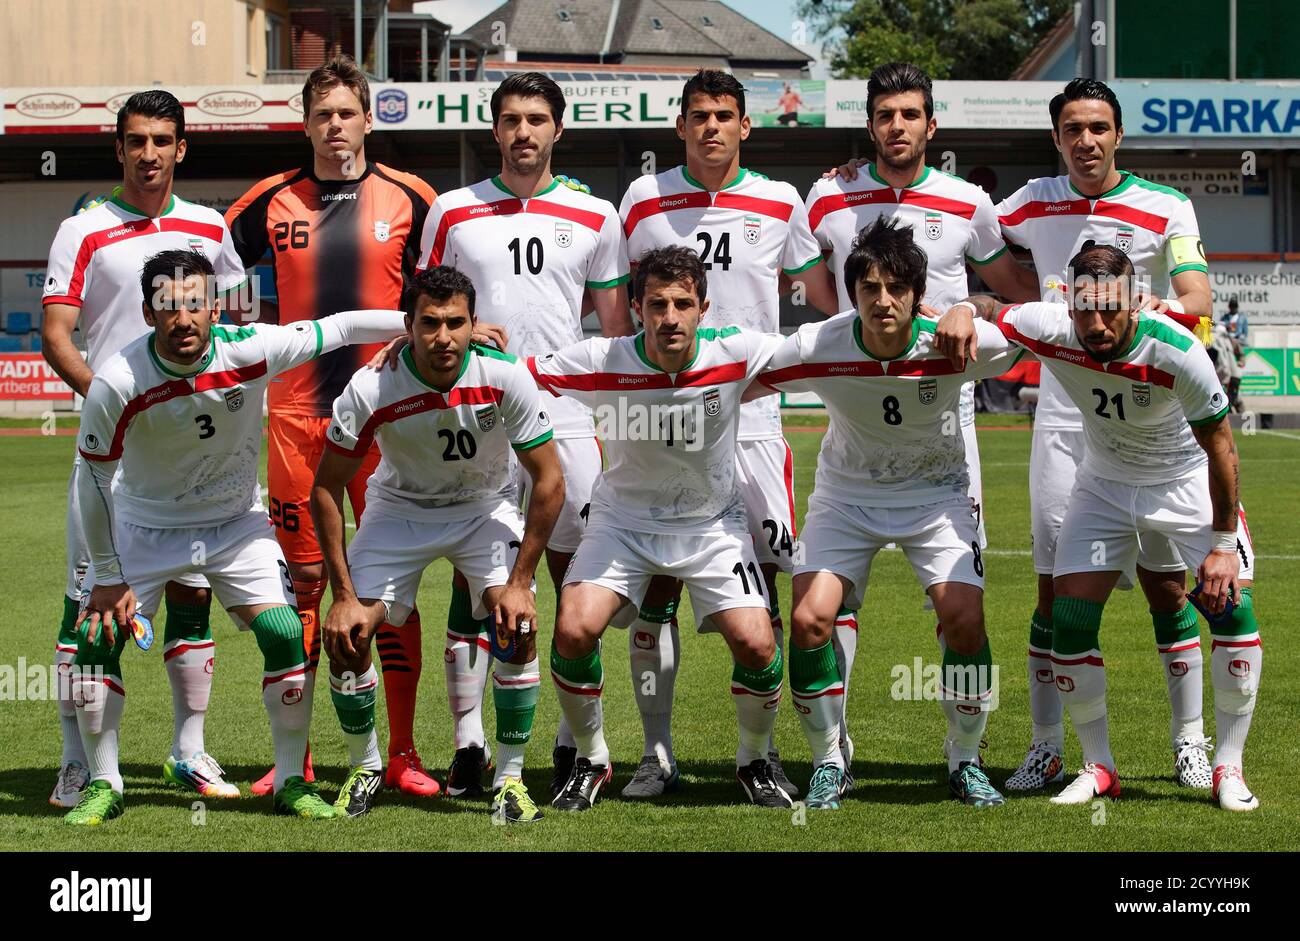 Iran's national soccer team players pose before their international  friendly soccer match against Angola in Hartberg May 30, 2014. The players  are (front row L-R) Ehsan Hajsafi, Steven Beitashour, Ghasem Haddadifar,  Sardar